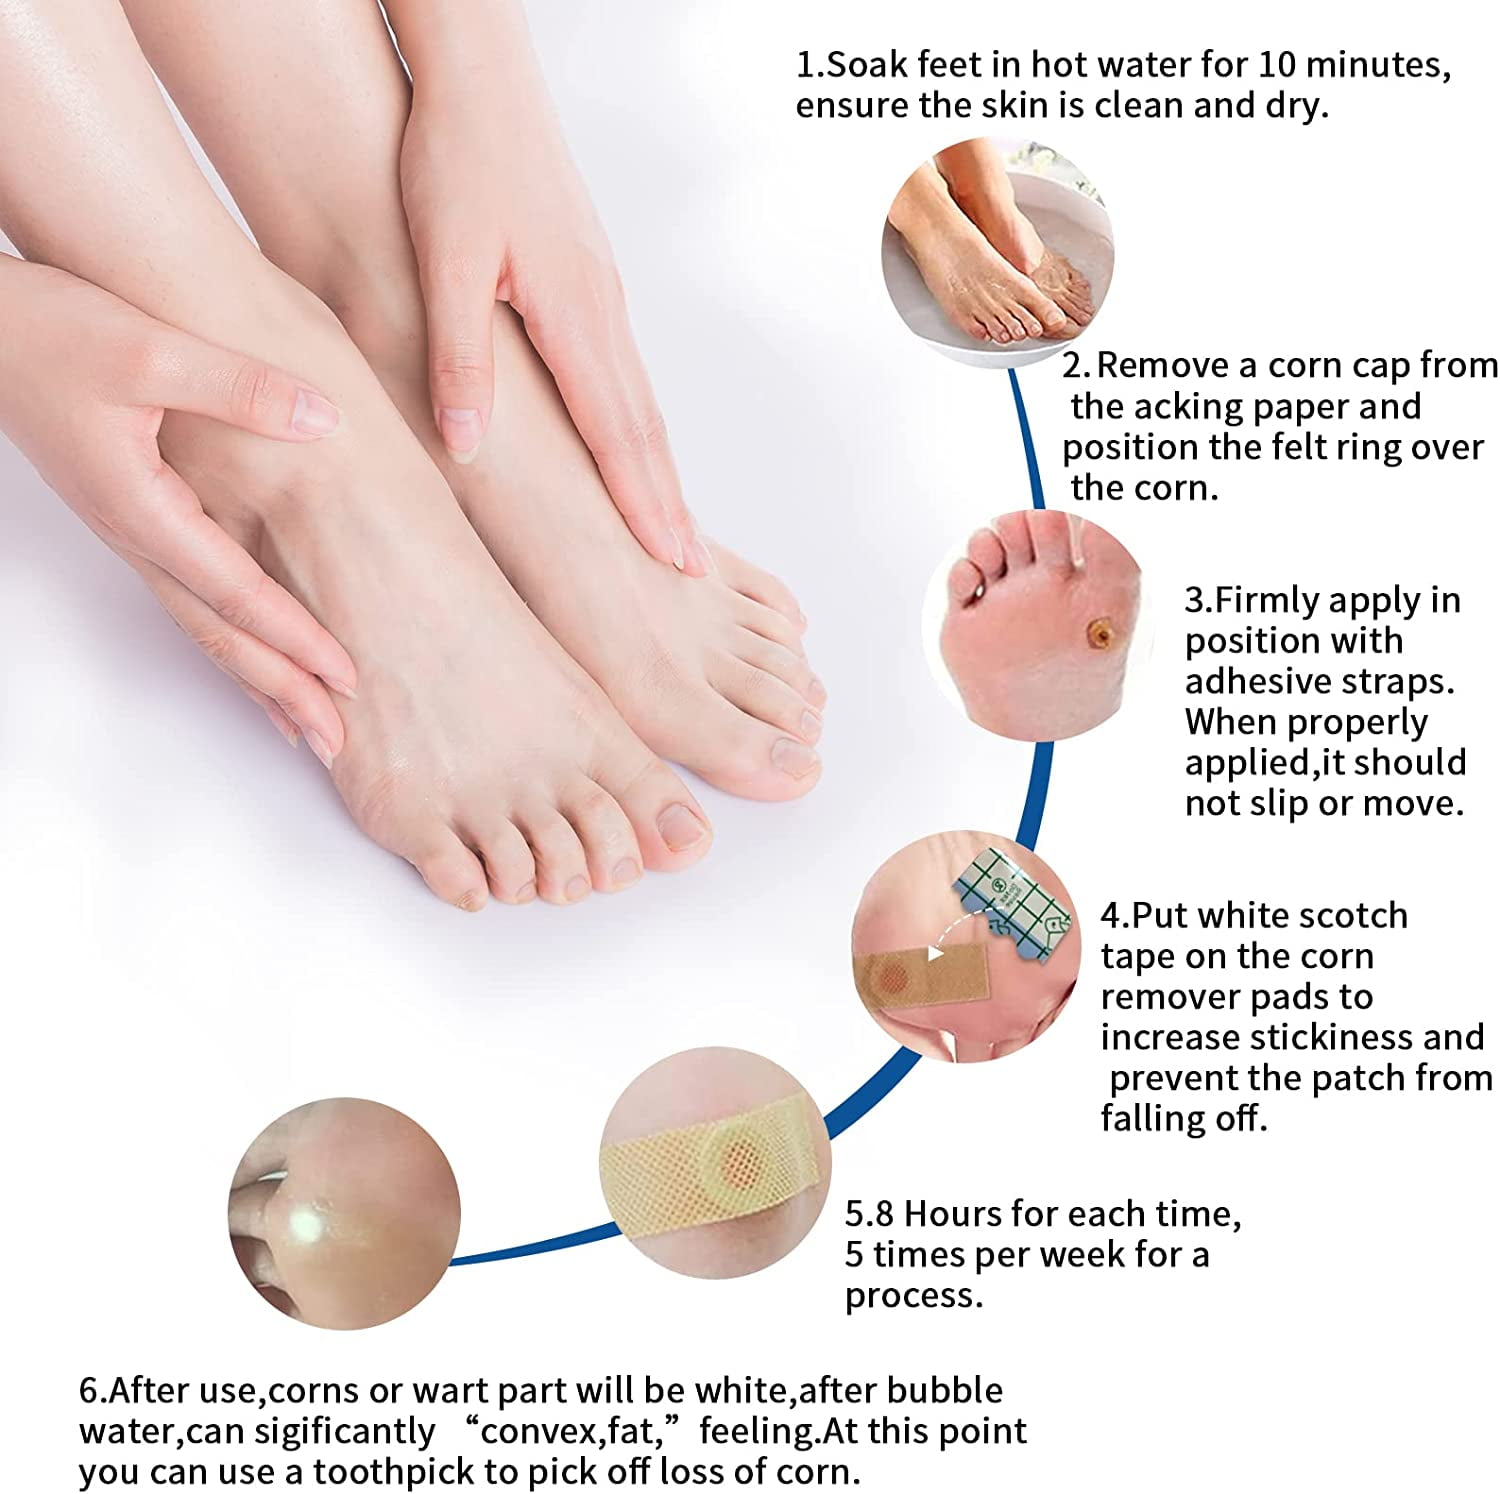 Callus Removal At Home: 5 Top Tips - Northwich Foot Clinic